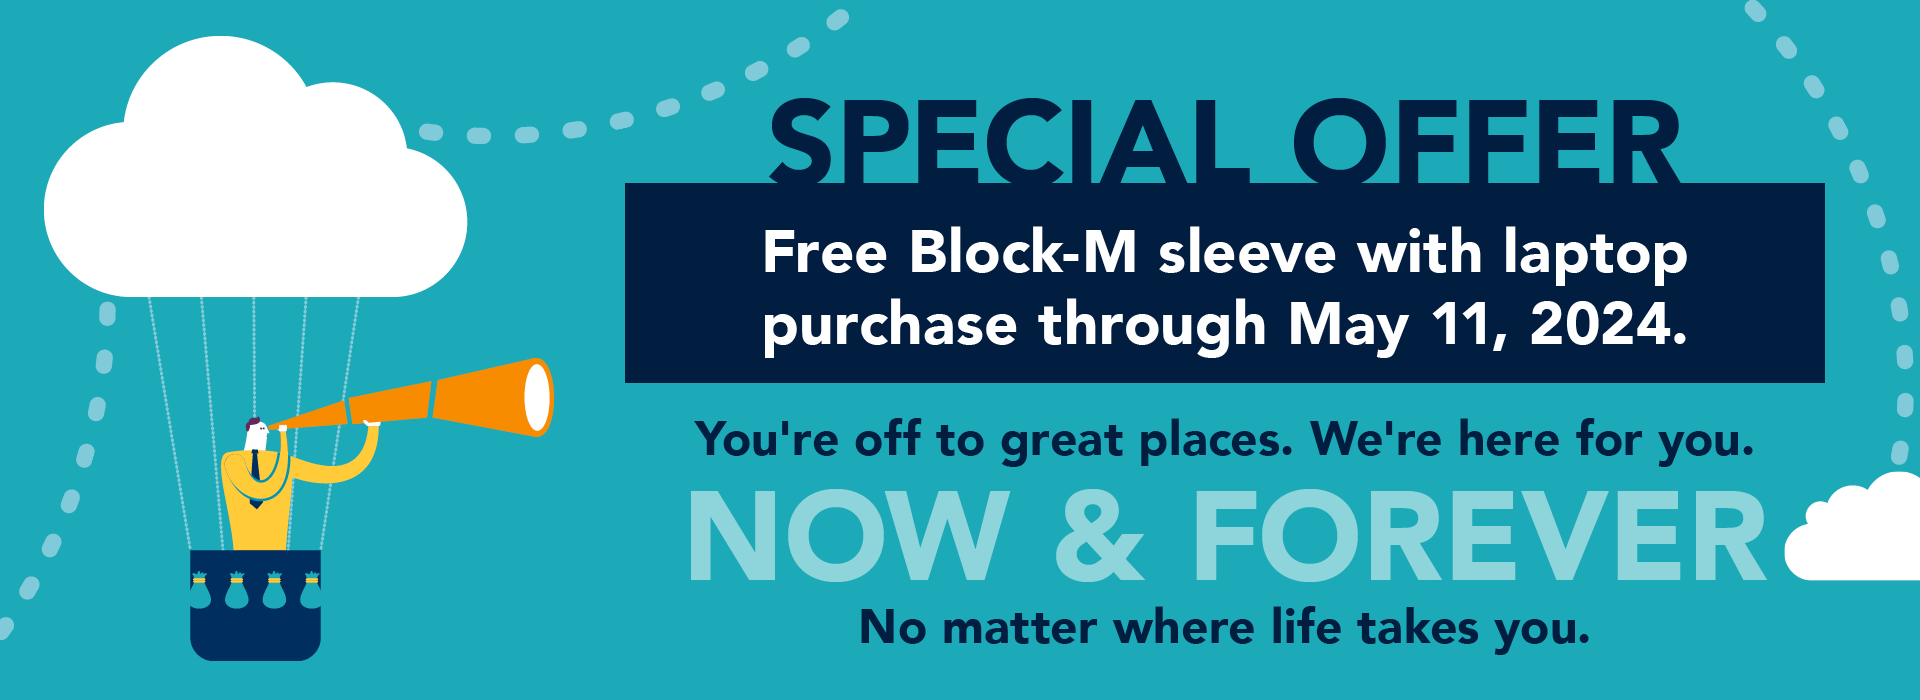 Now and Forever free sleeve offer